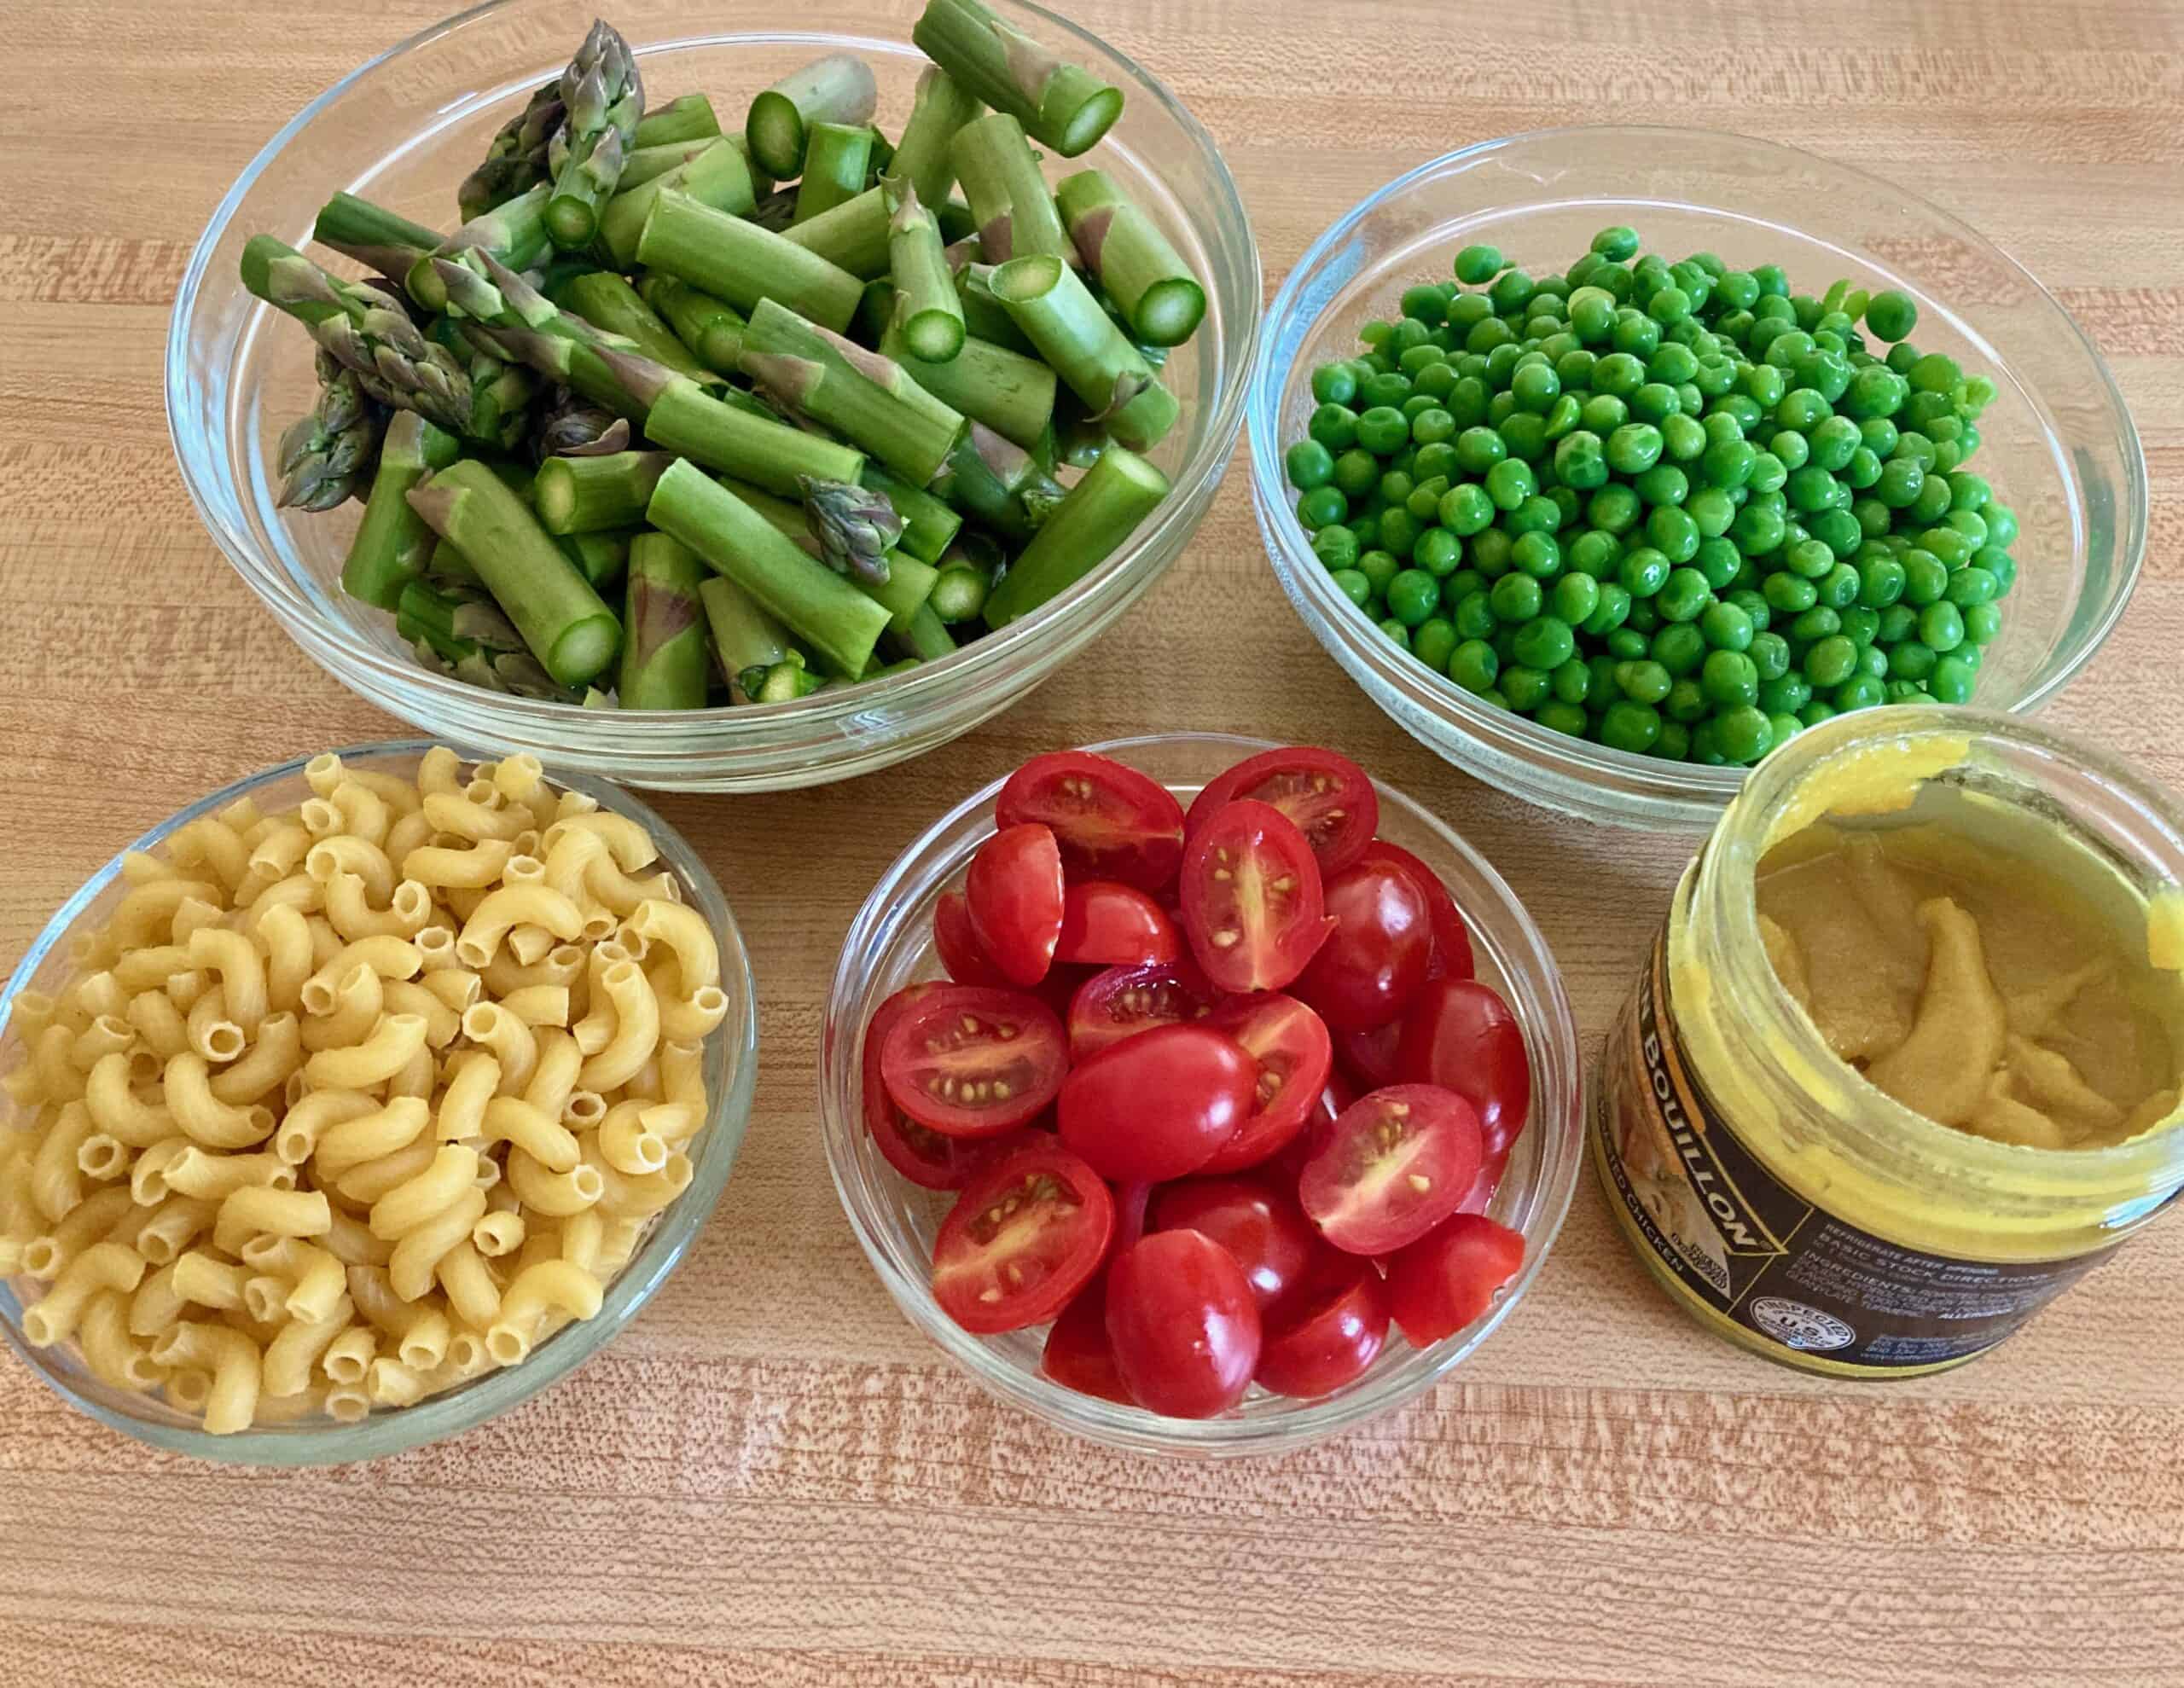 Bowls of chopped asparagus, peas, elbow pasta and sliced ​​cherry tomatoes on the table and a jar of Better Than Bouillon